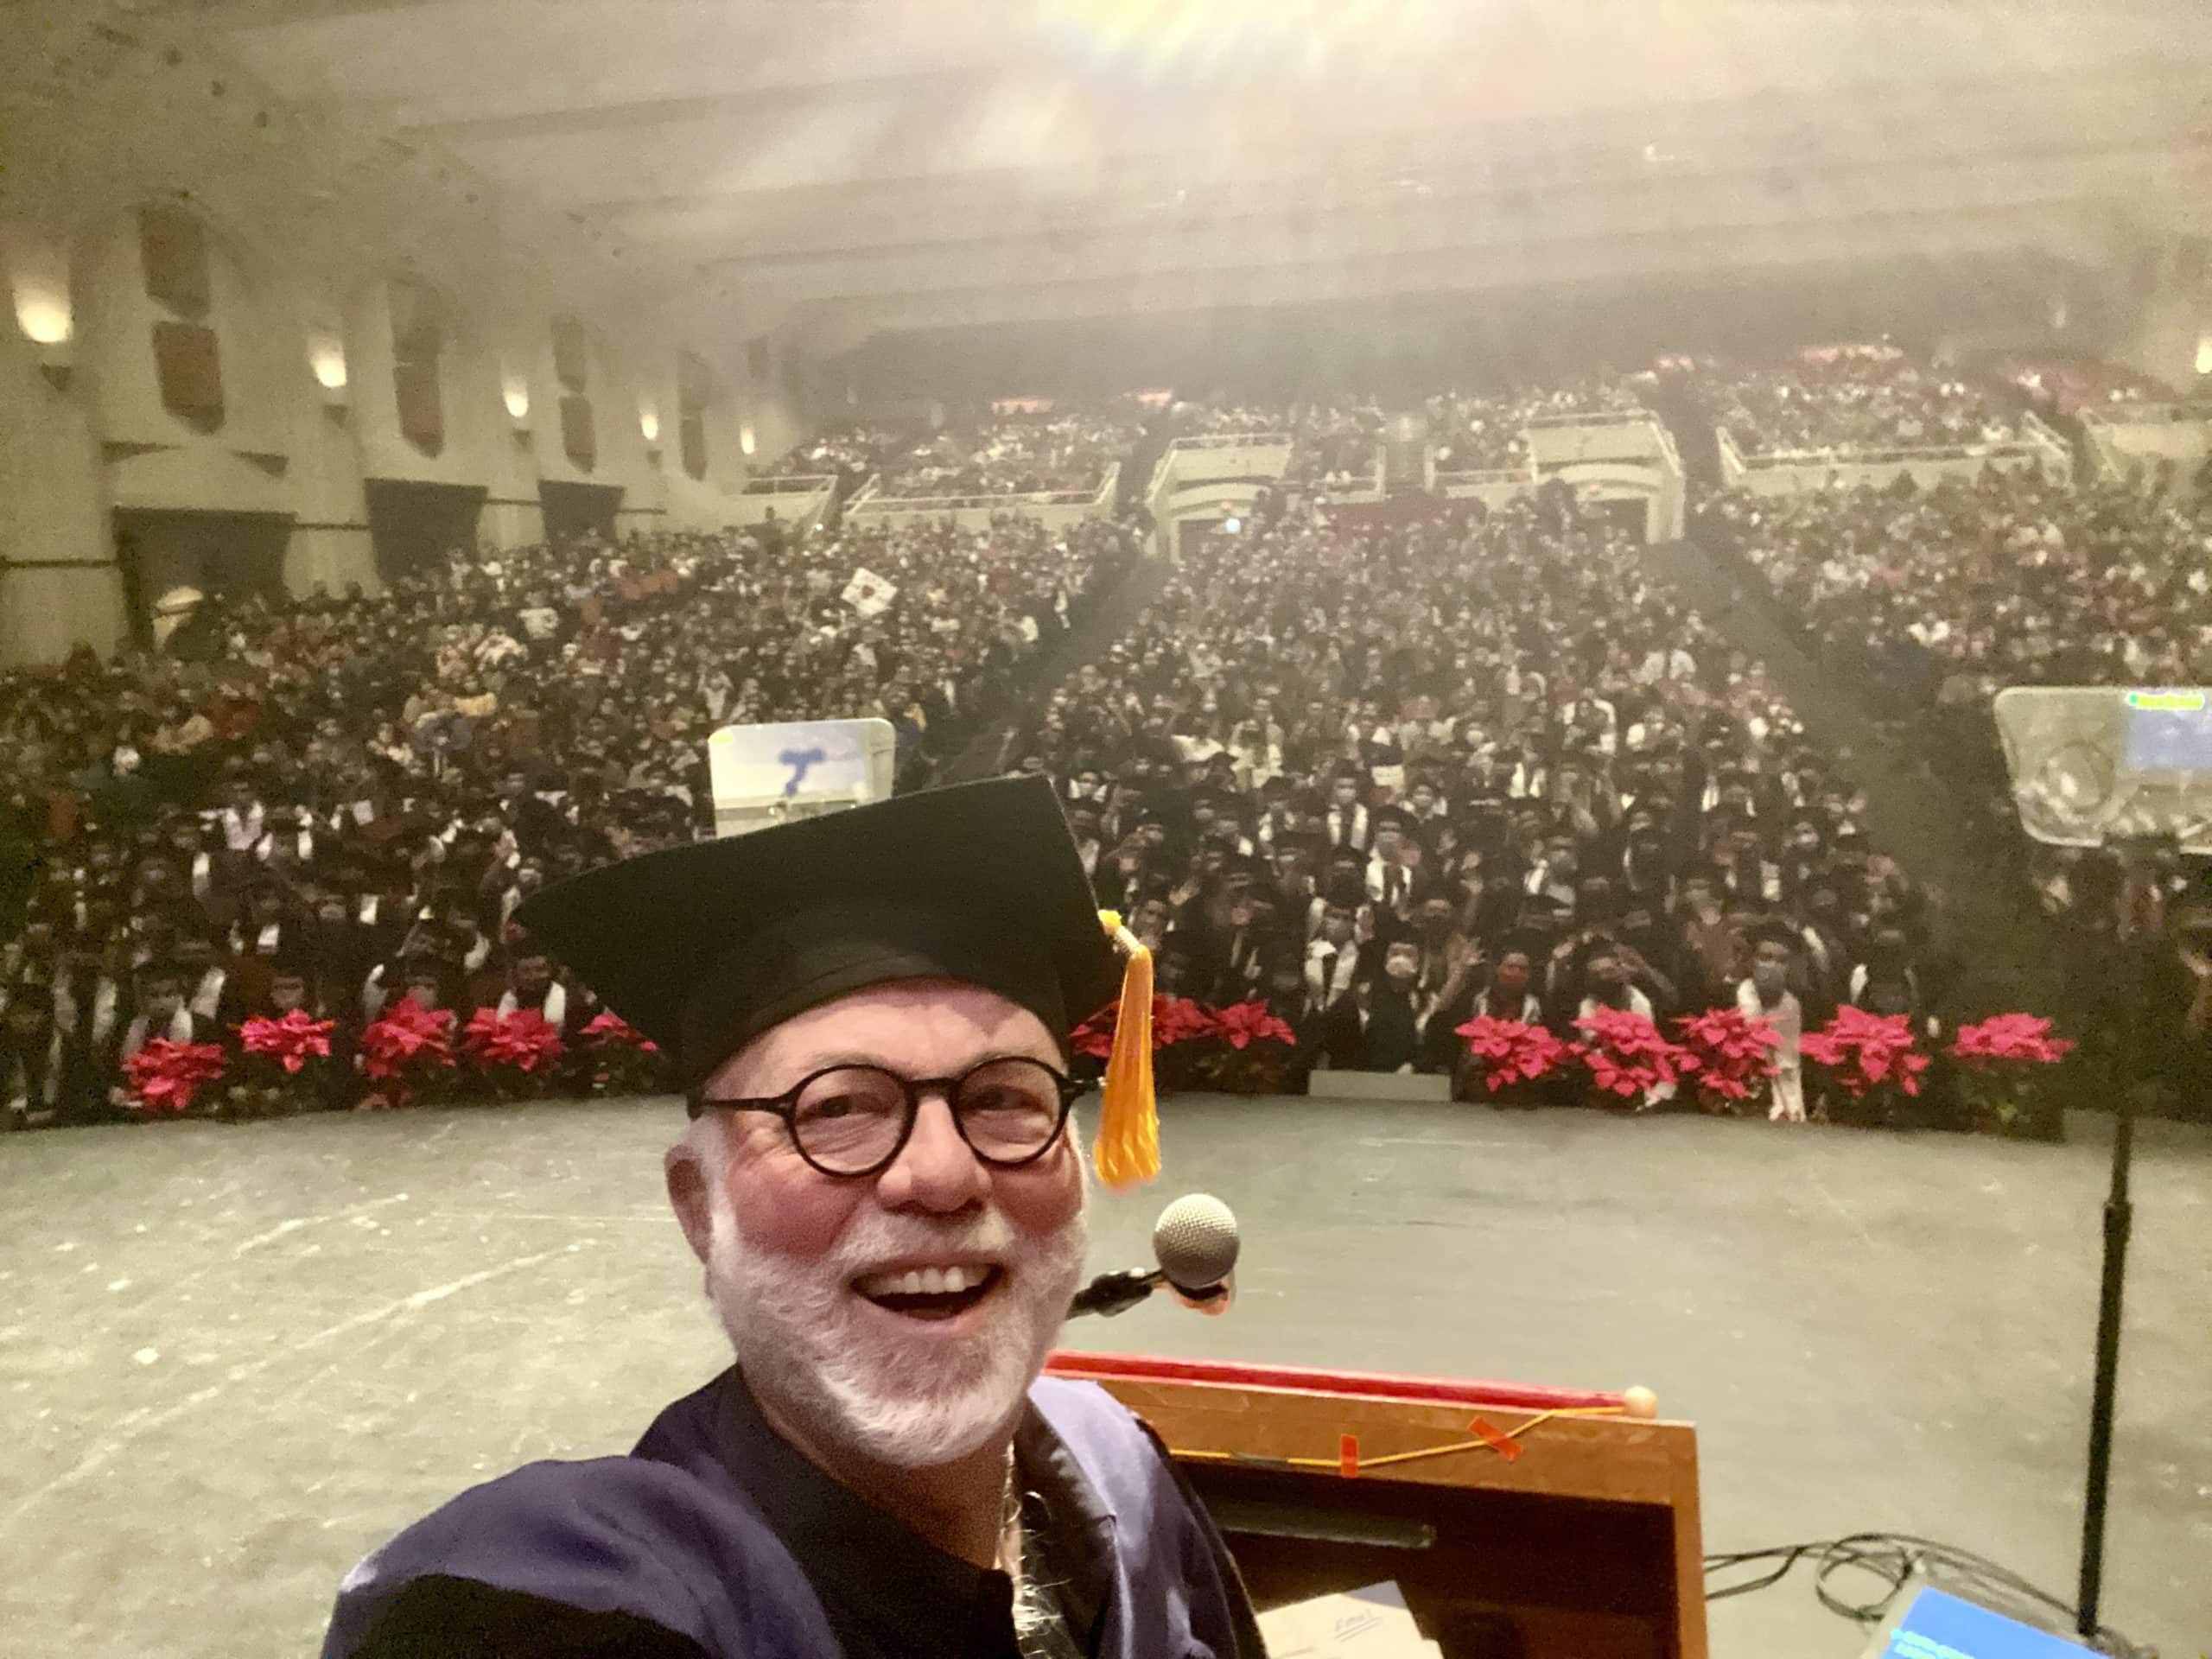 A selfie in Centennial Hall after commencement address to University of Arizona’s “The People College.”